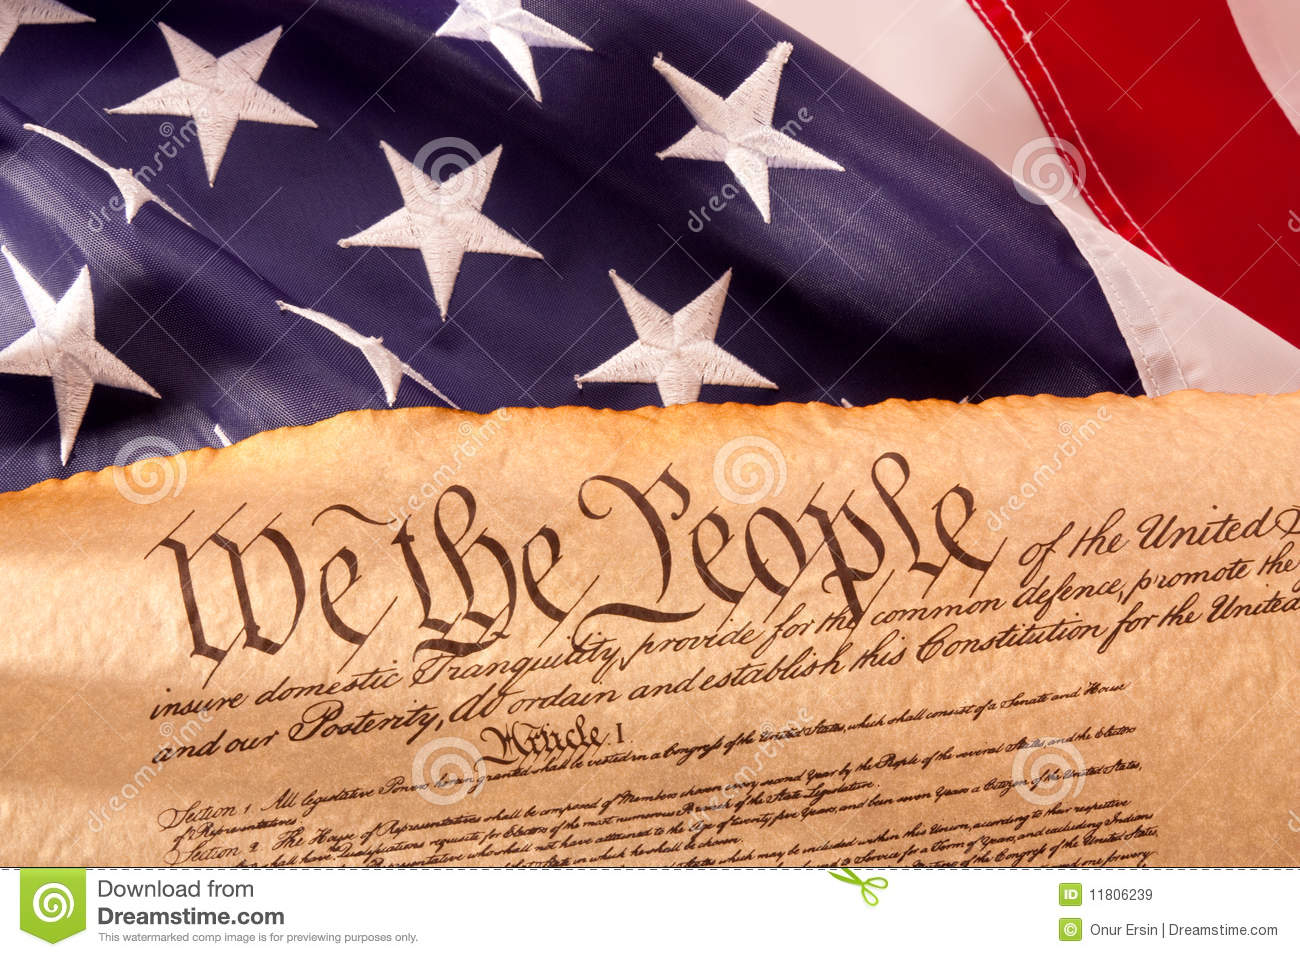 The U.S. Constitution is signed on September 17, 1787 - Maggie L. Walker  Governor's School